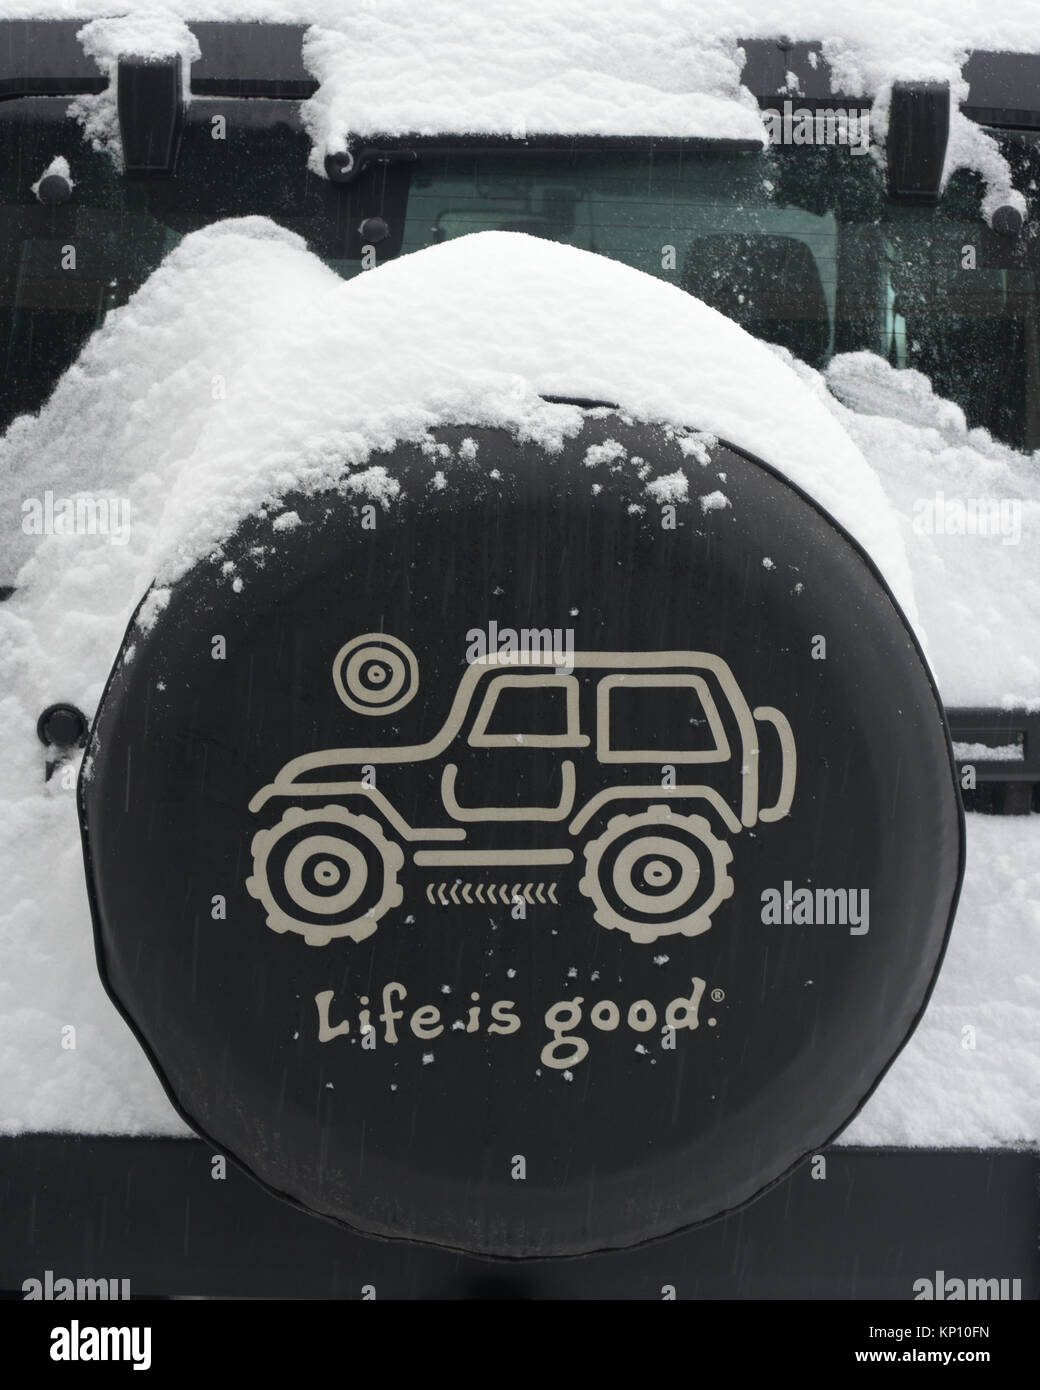 A Life is Good brand spare tire cover on the spare tire of a Jeep Wrangler in winter covered with snow in a snow storm in the Adirondack Mountains. Stock Photo